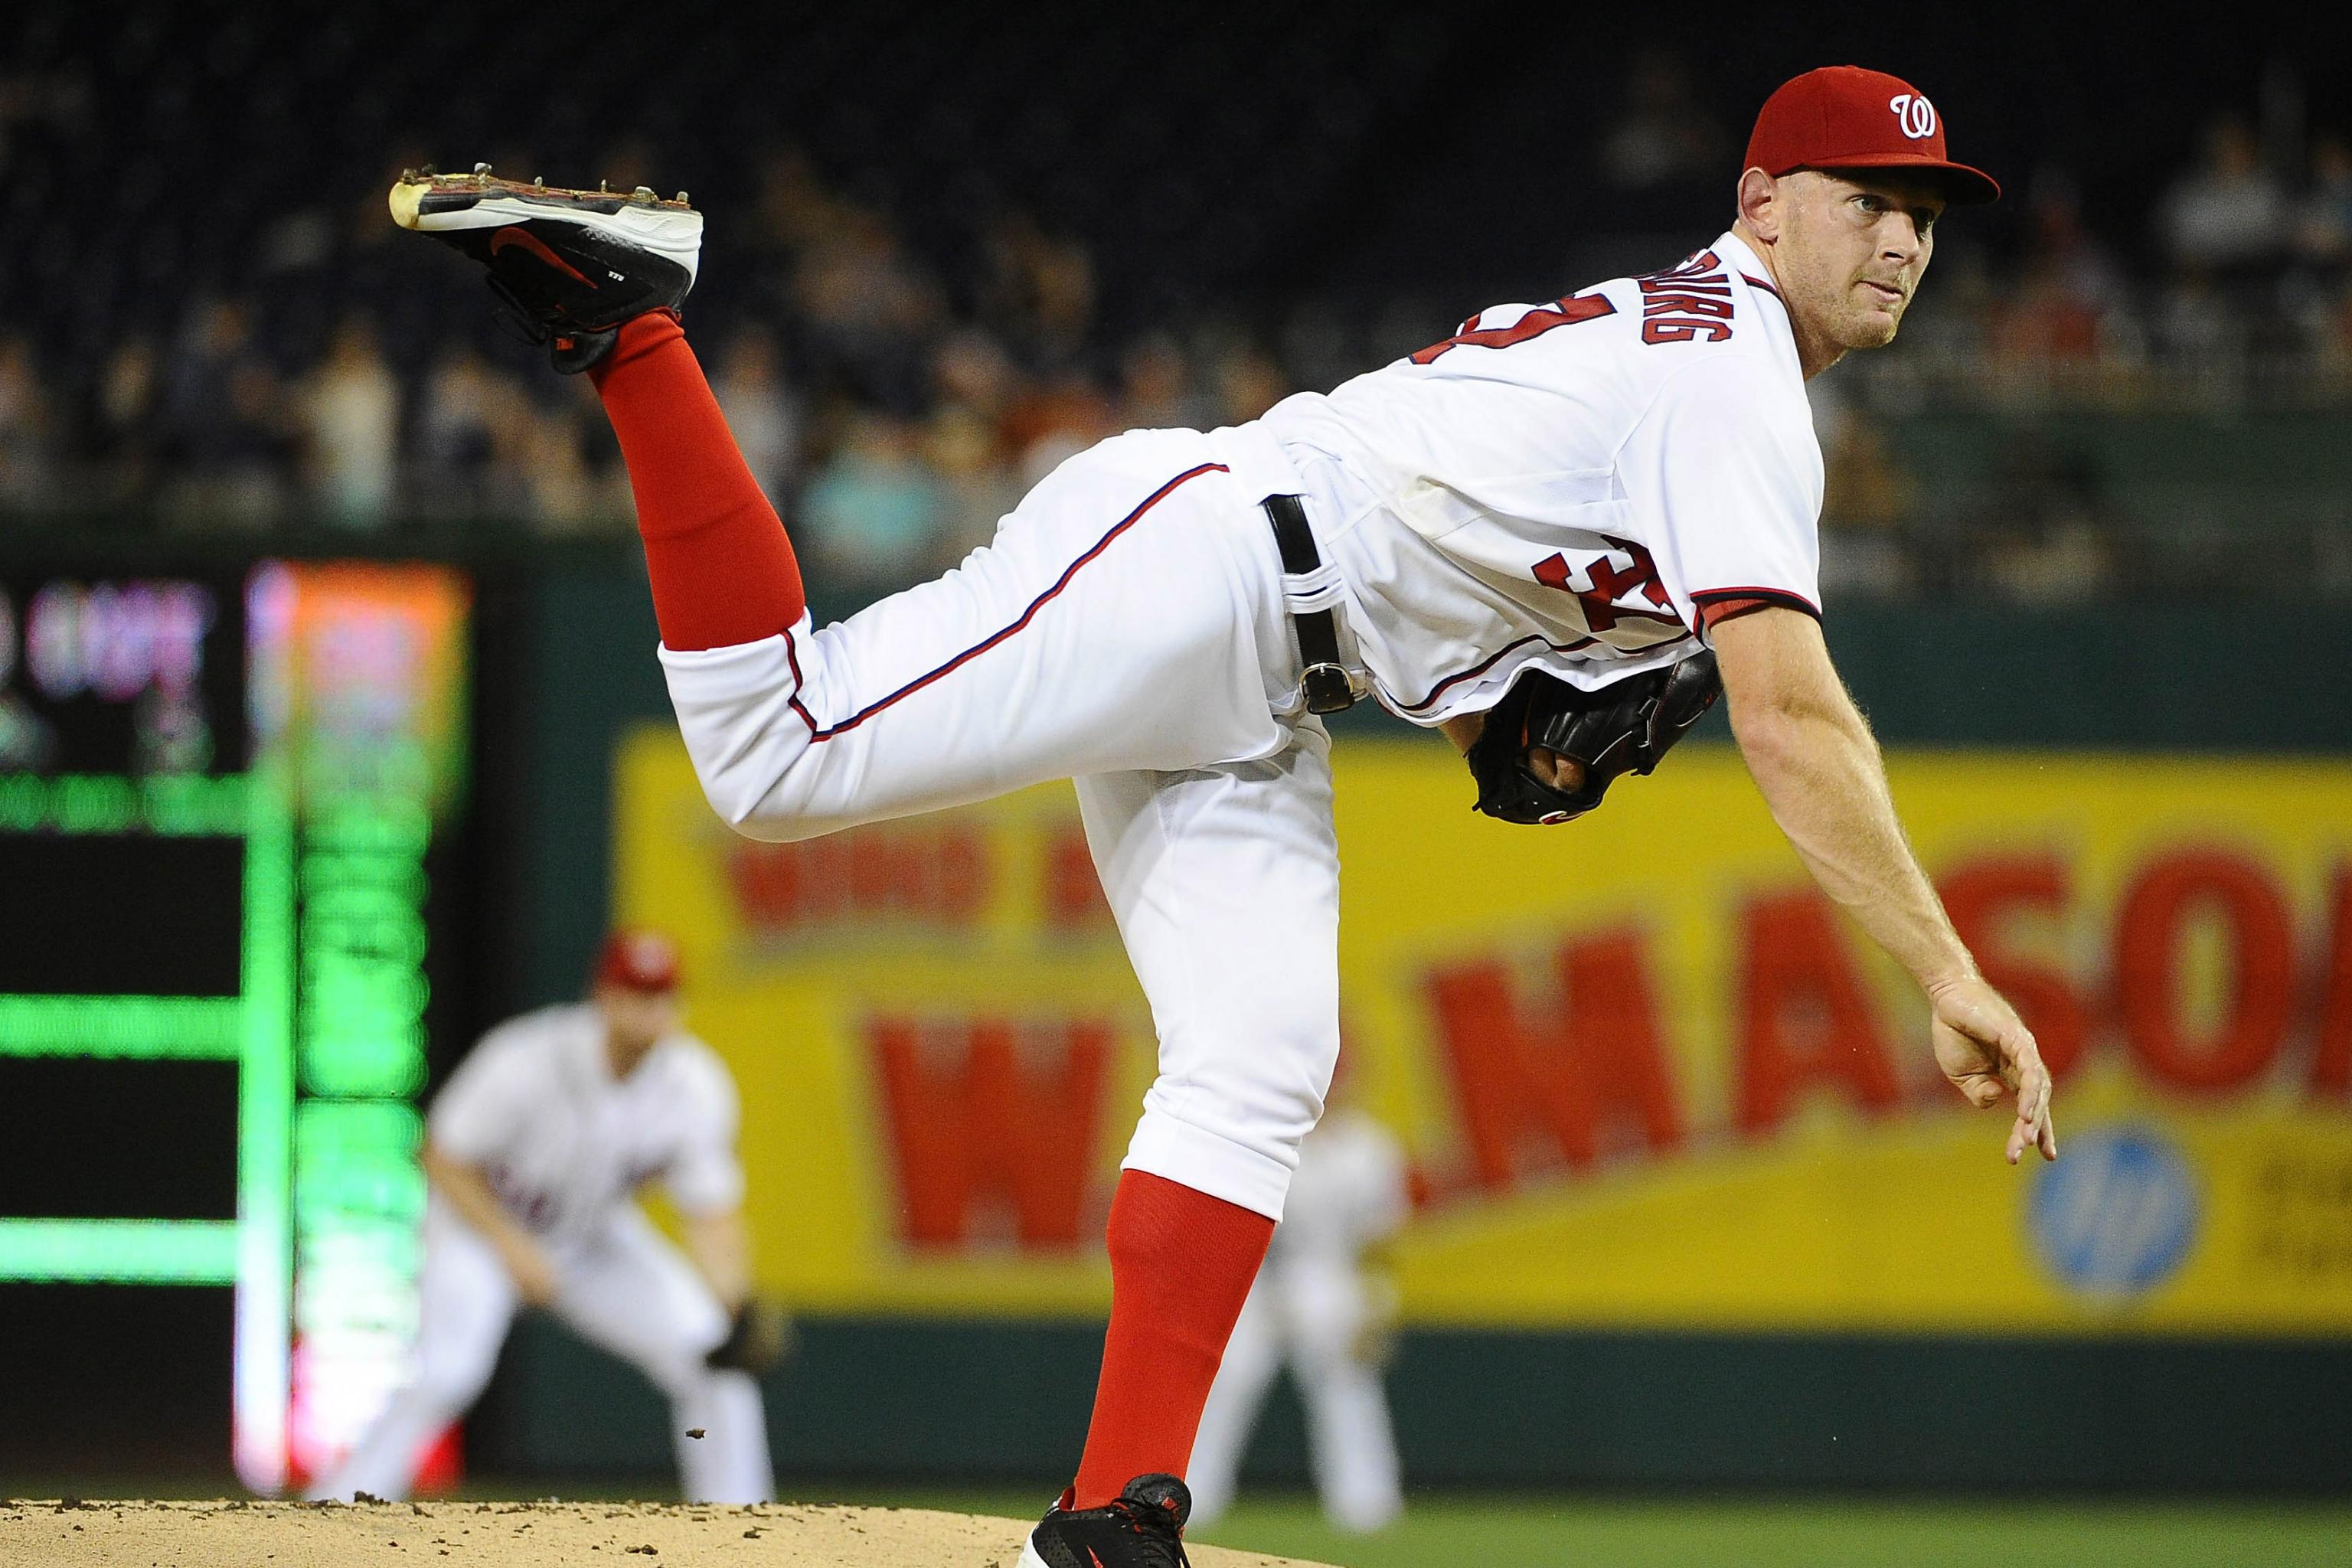 Stephen Strasburg is hurt again. But he has proved he'll come back